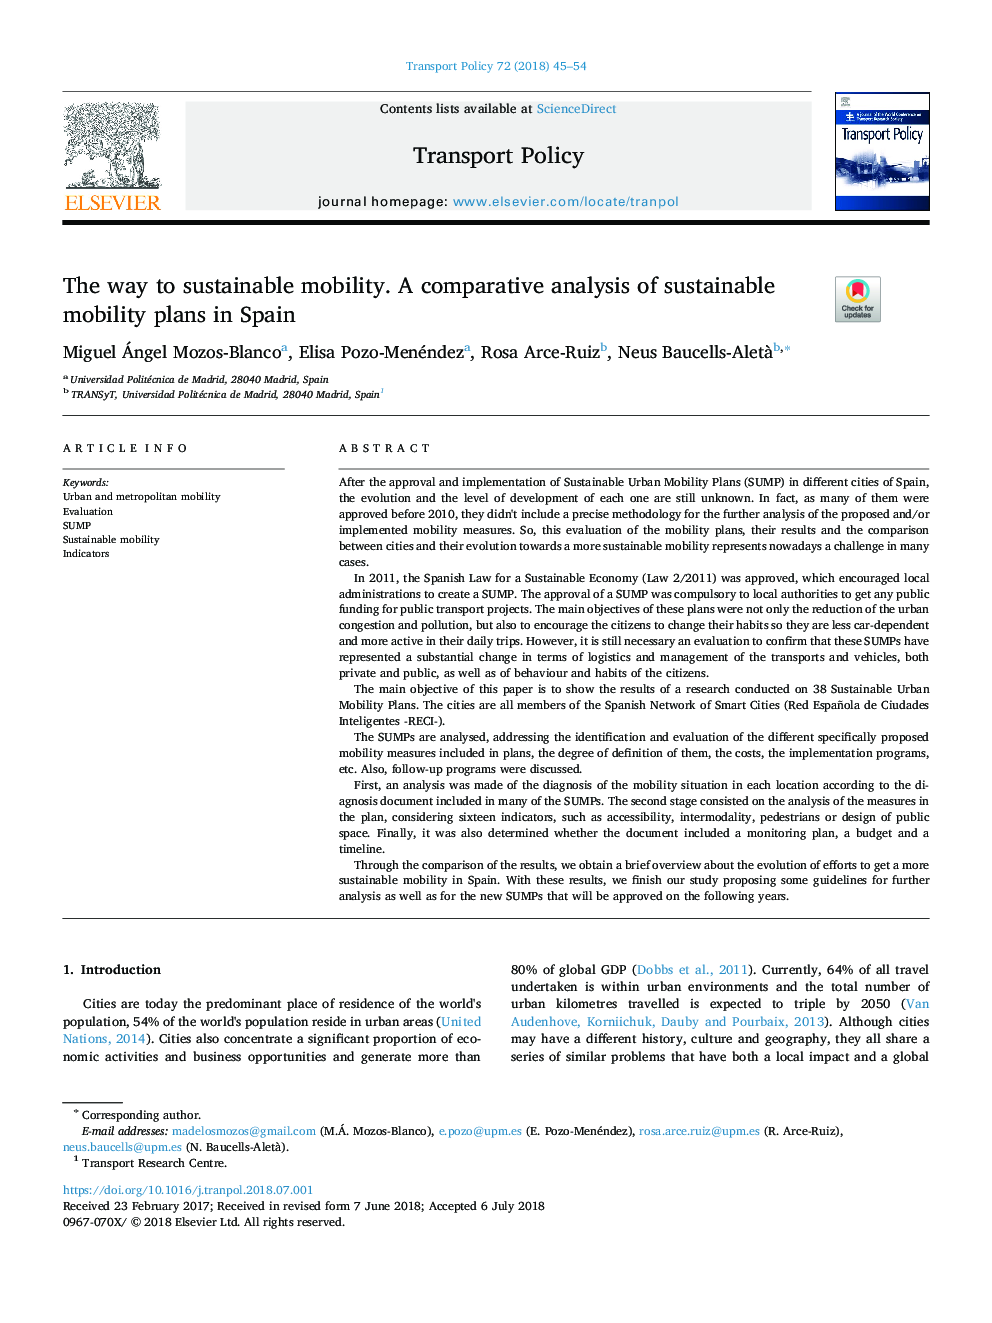 The way to sustainable mobility. A comparative analysis of sustainable mobility plans in Spain